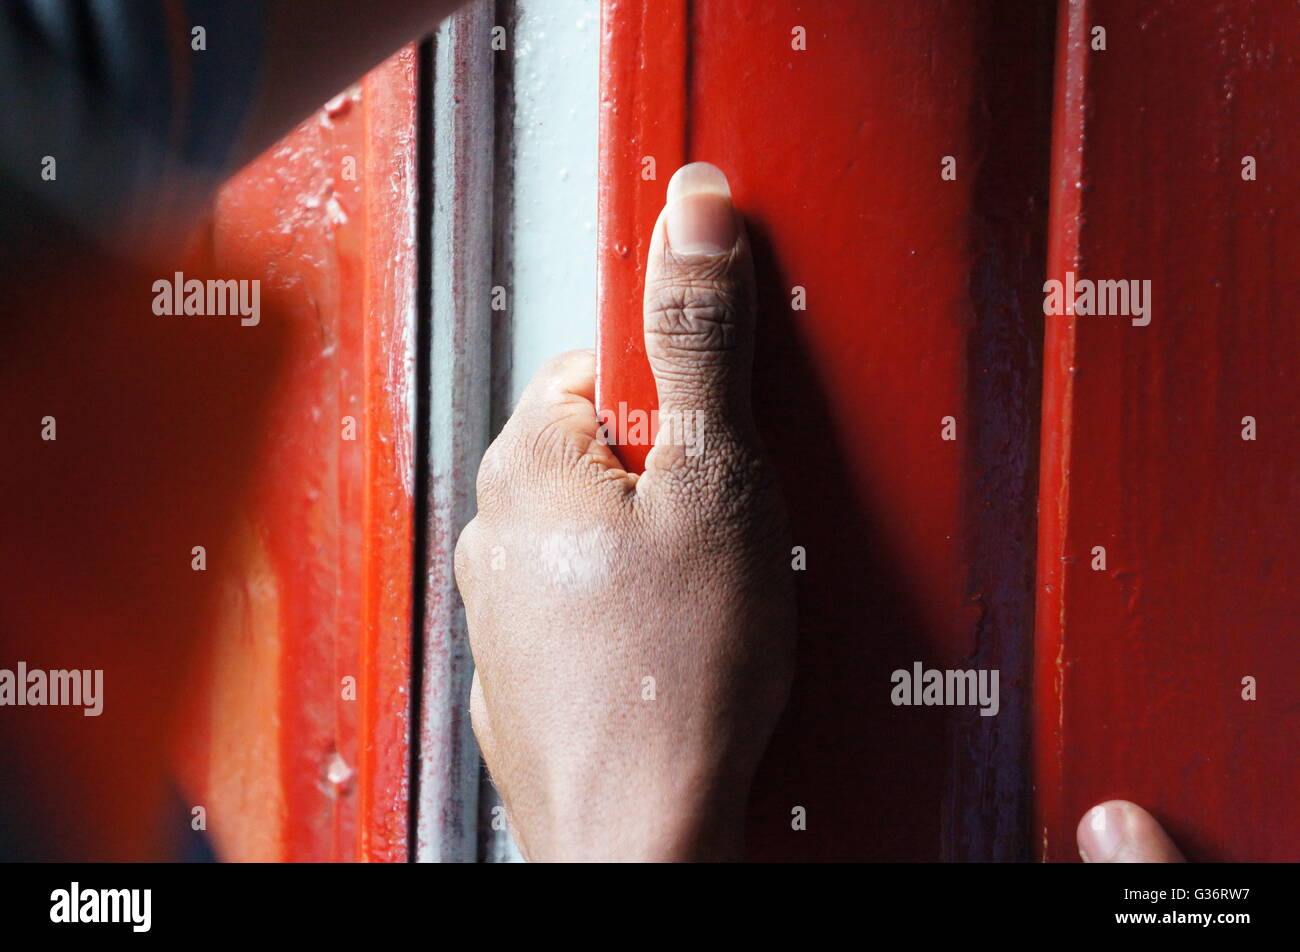 The hand of a man in a train from Colombo to Kandy, Sri Lanka Stock Photo